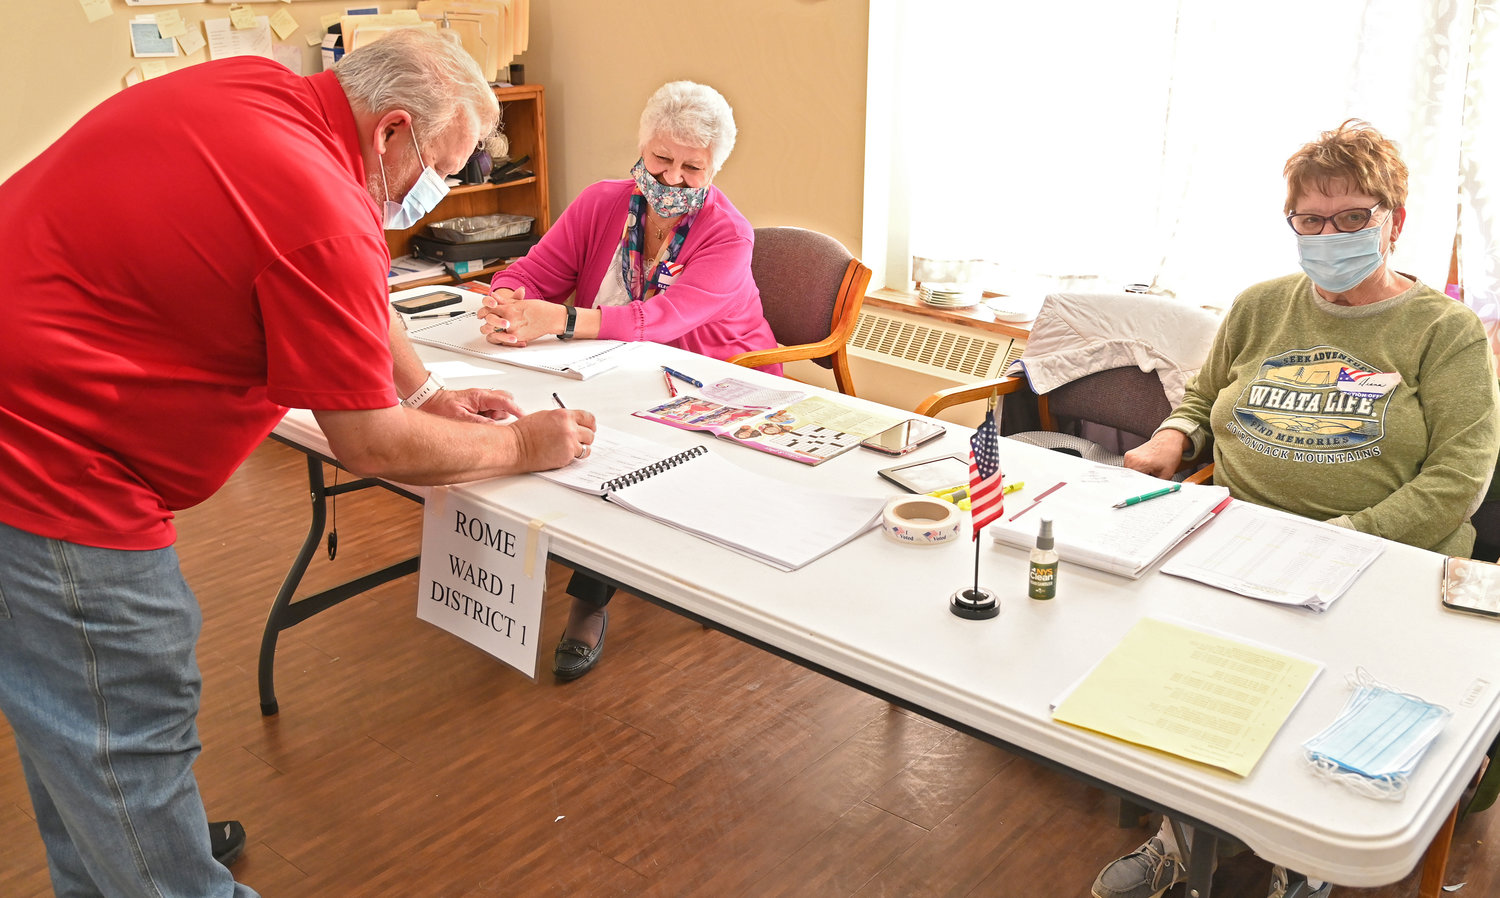 SIGNING IN — Voter Donald Narrow signs the book with voting inspectors Patricia Johnson and Diana Dargenio looking on in the city’s Ward 1 at the Copper City Community Connection, 305 E. Locust St., on Tuesday.